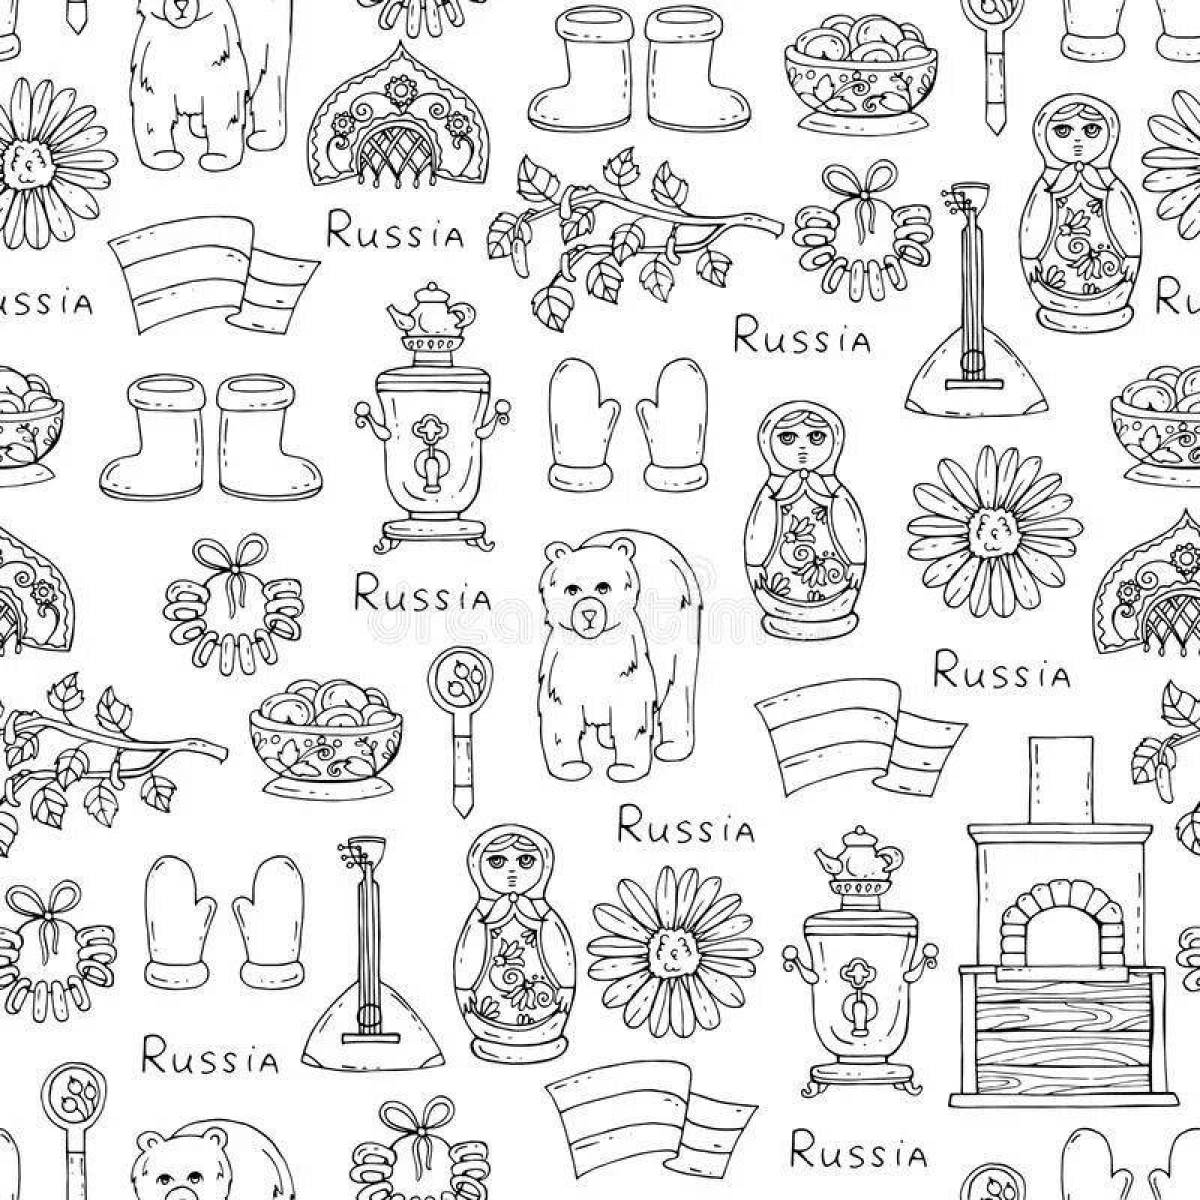 Colorful Russian characters coloring book for kids